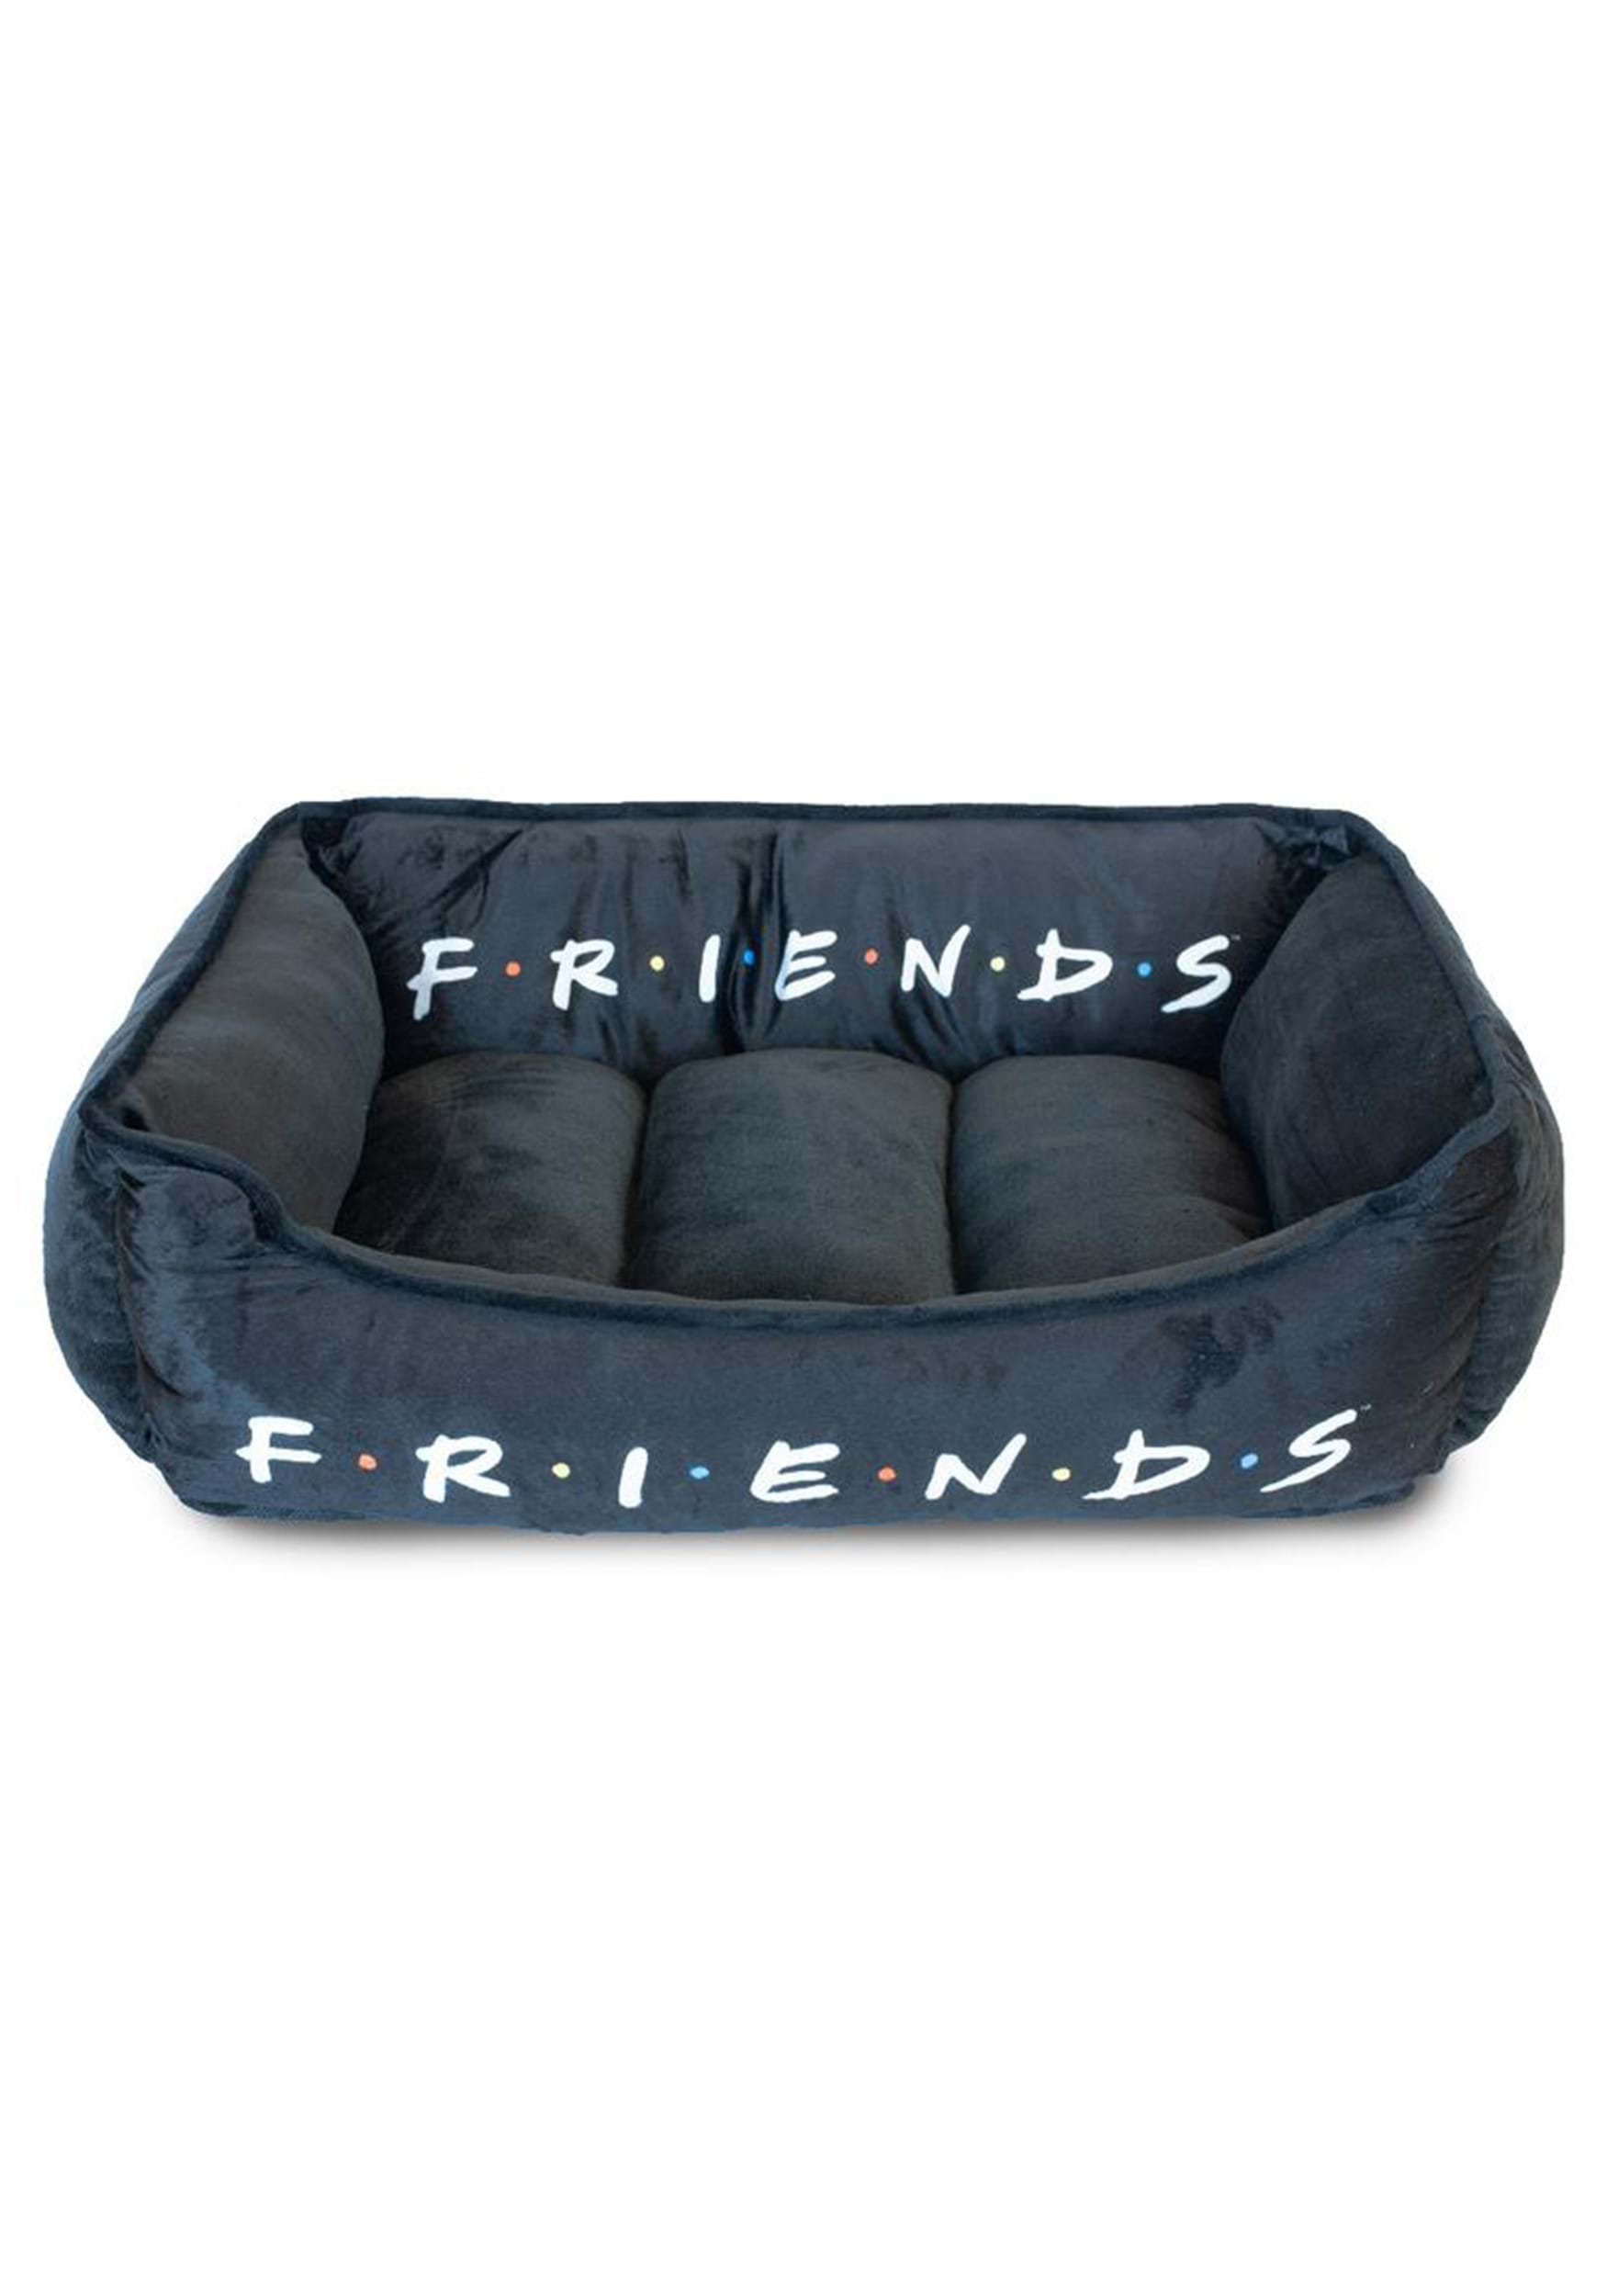 Black and White FRIENDS Dog Bed